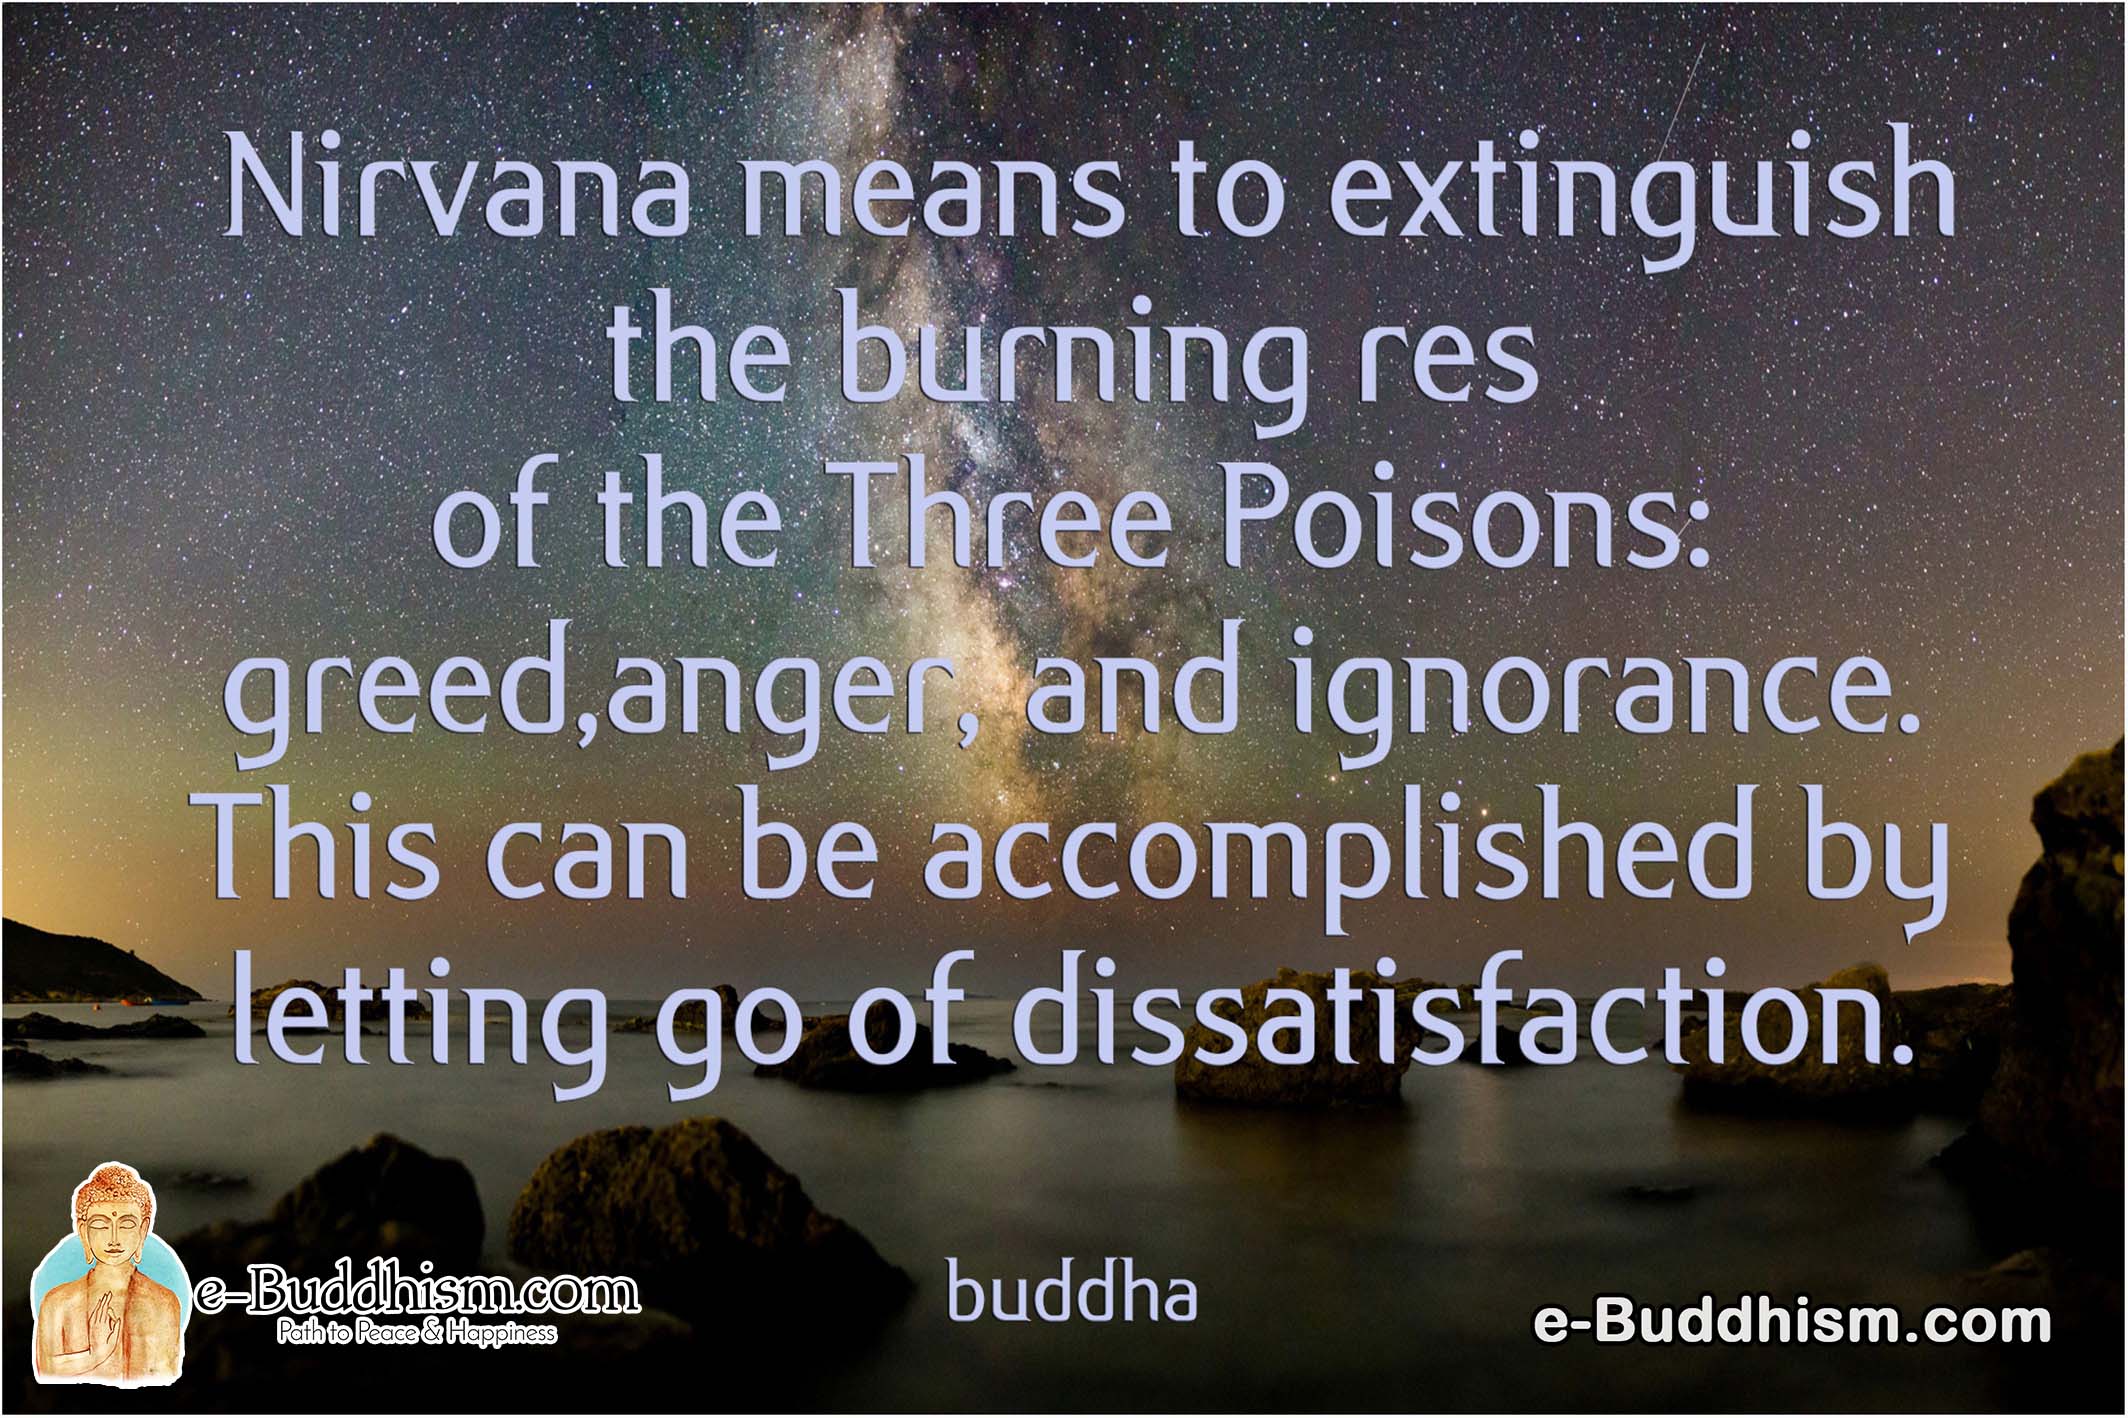 Nirvana means to extinguish the burning rest of the three poisons: greed, anger and ignorance. This can be accomplished by letting go of dissatisfaction. -Buddha